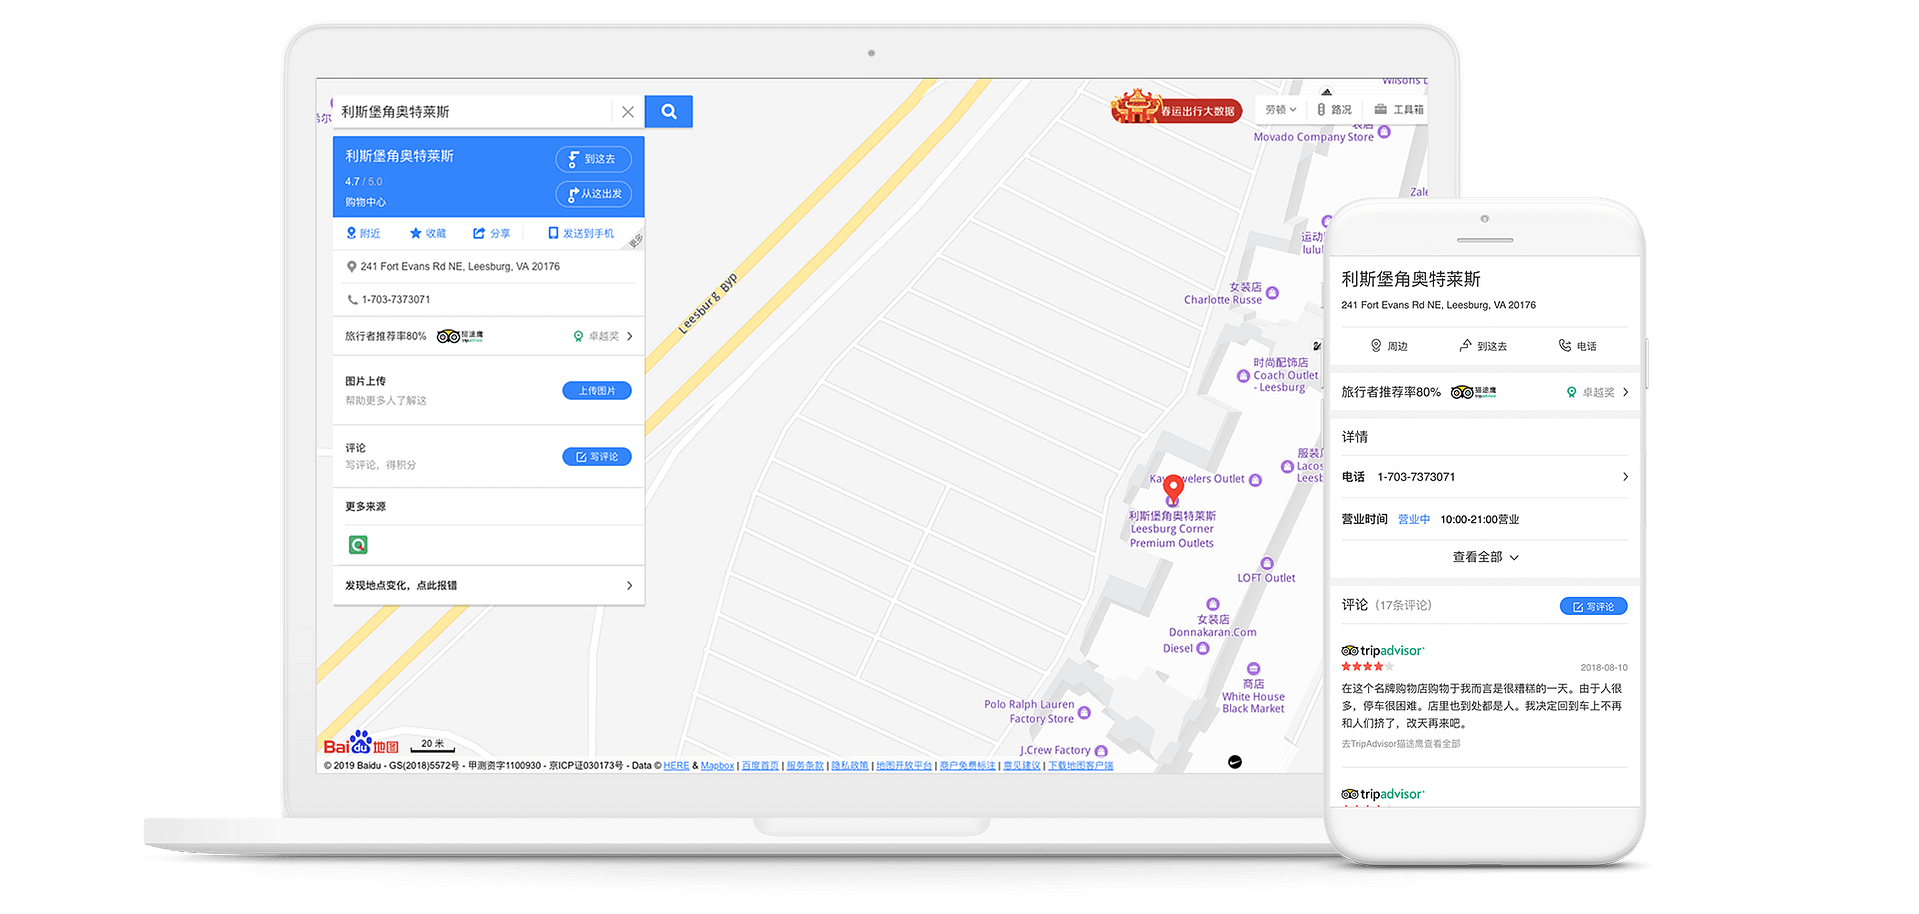 Get Your Business Listed on Baidu Maps